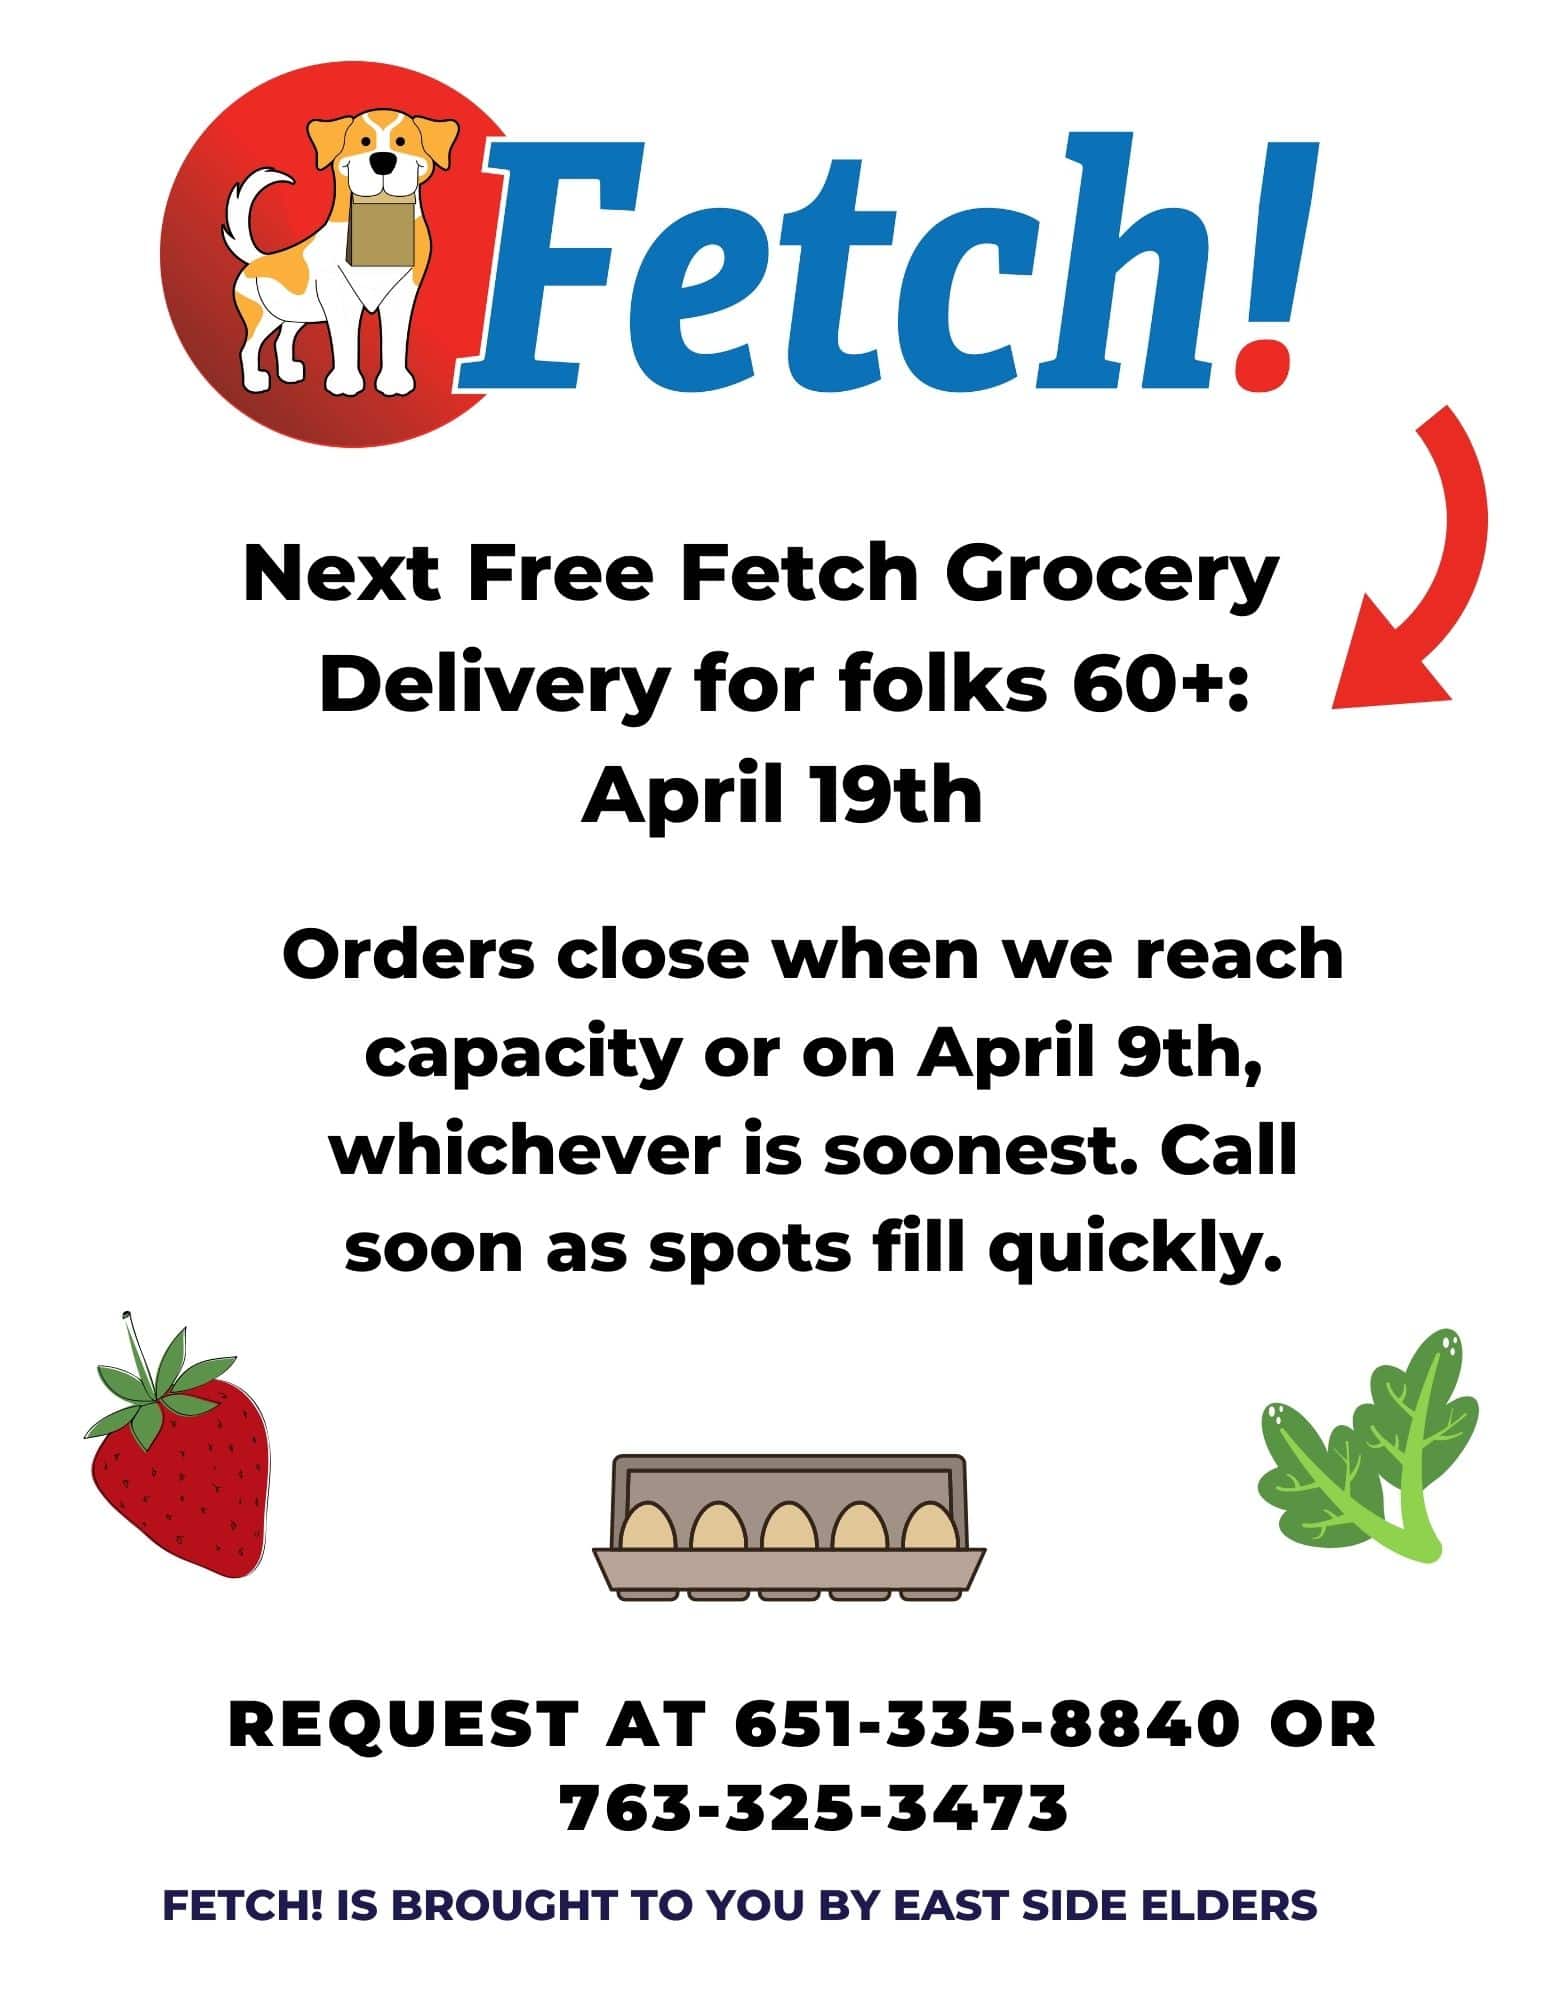 Flyer for the April 19th Fetch! grocery delivery. Features illustrative images of a strawberry, eggs, and greens. Logo for the program includes a yellow and white dog holding a paper bag. Text: Fetch! Next Free Fetch Grocery Delivery for folks 60+: April 19th. Orders close when we reach capacity or on April 9th, whichever is soonest. Call soon as spots fill quickly. Request at 651-335-8840 or 763-325-3473. Fetch! is brought to you by East Side Elders.